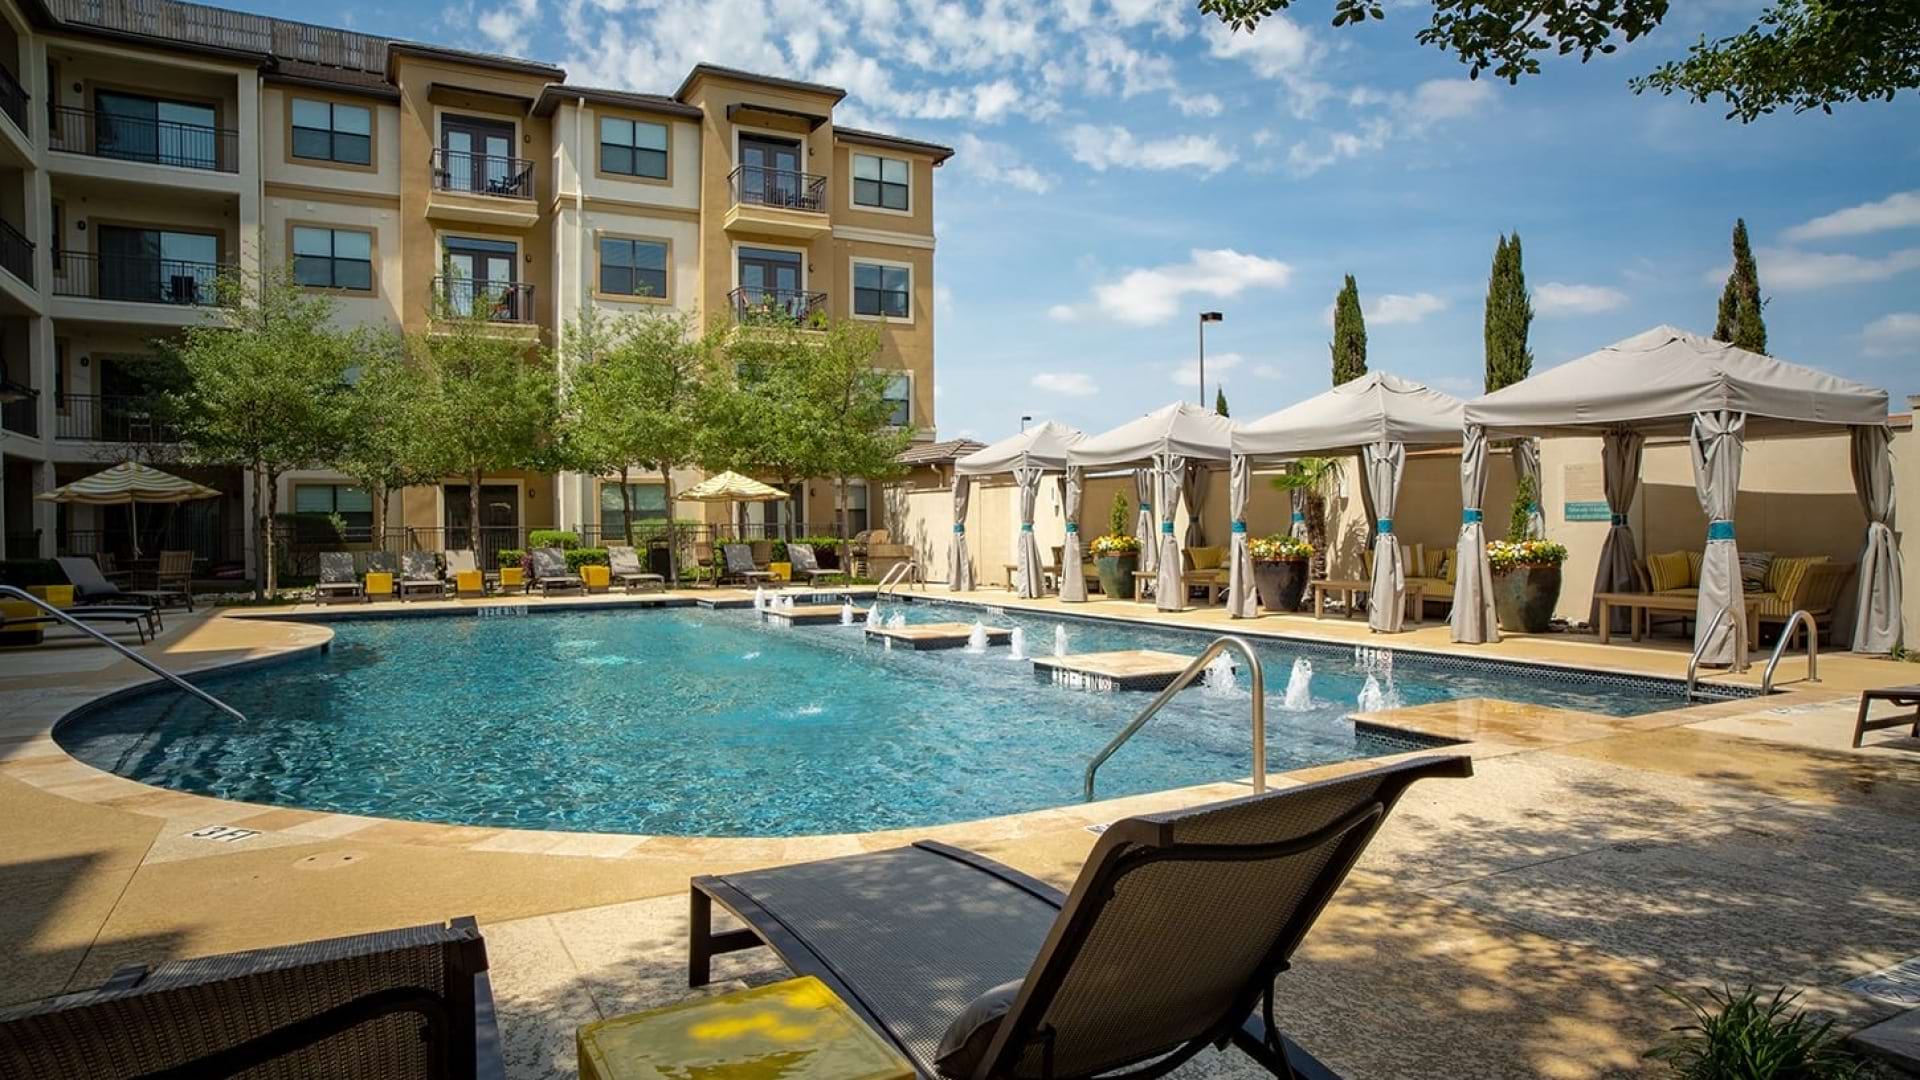 Addison Circle apartments with resort-style swimming pool